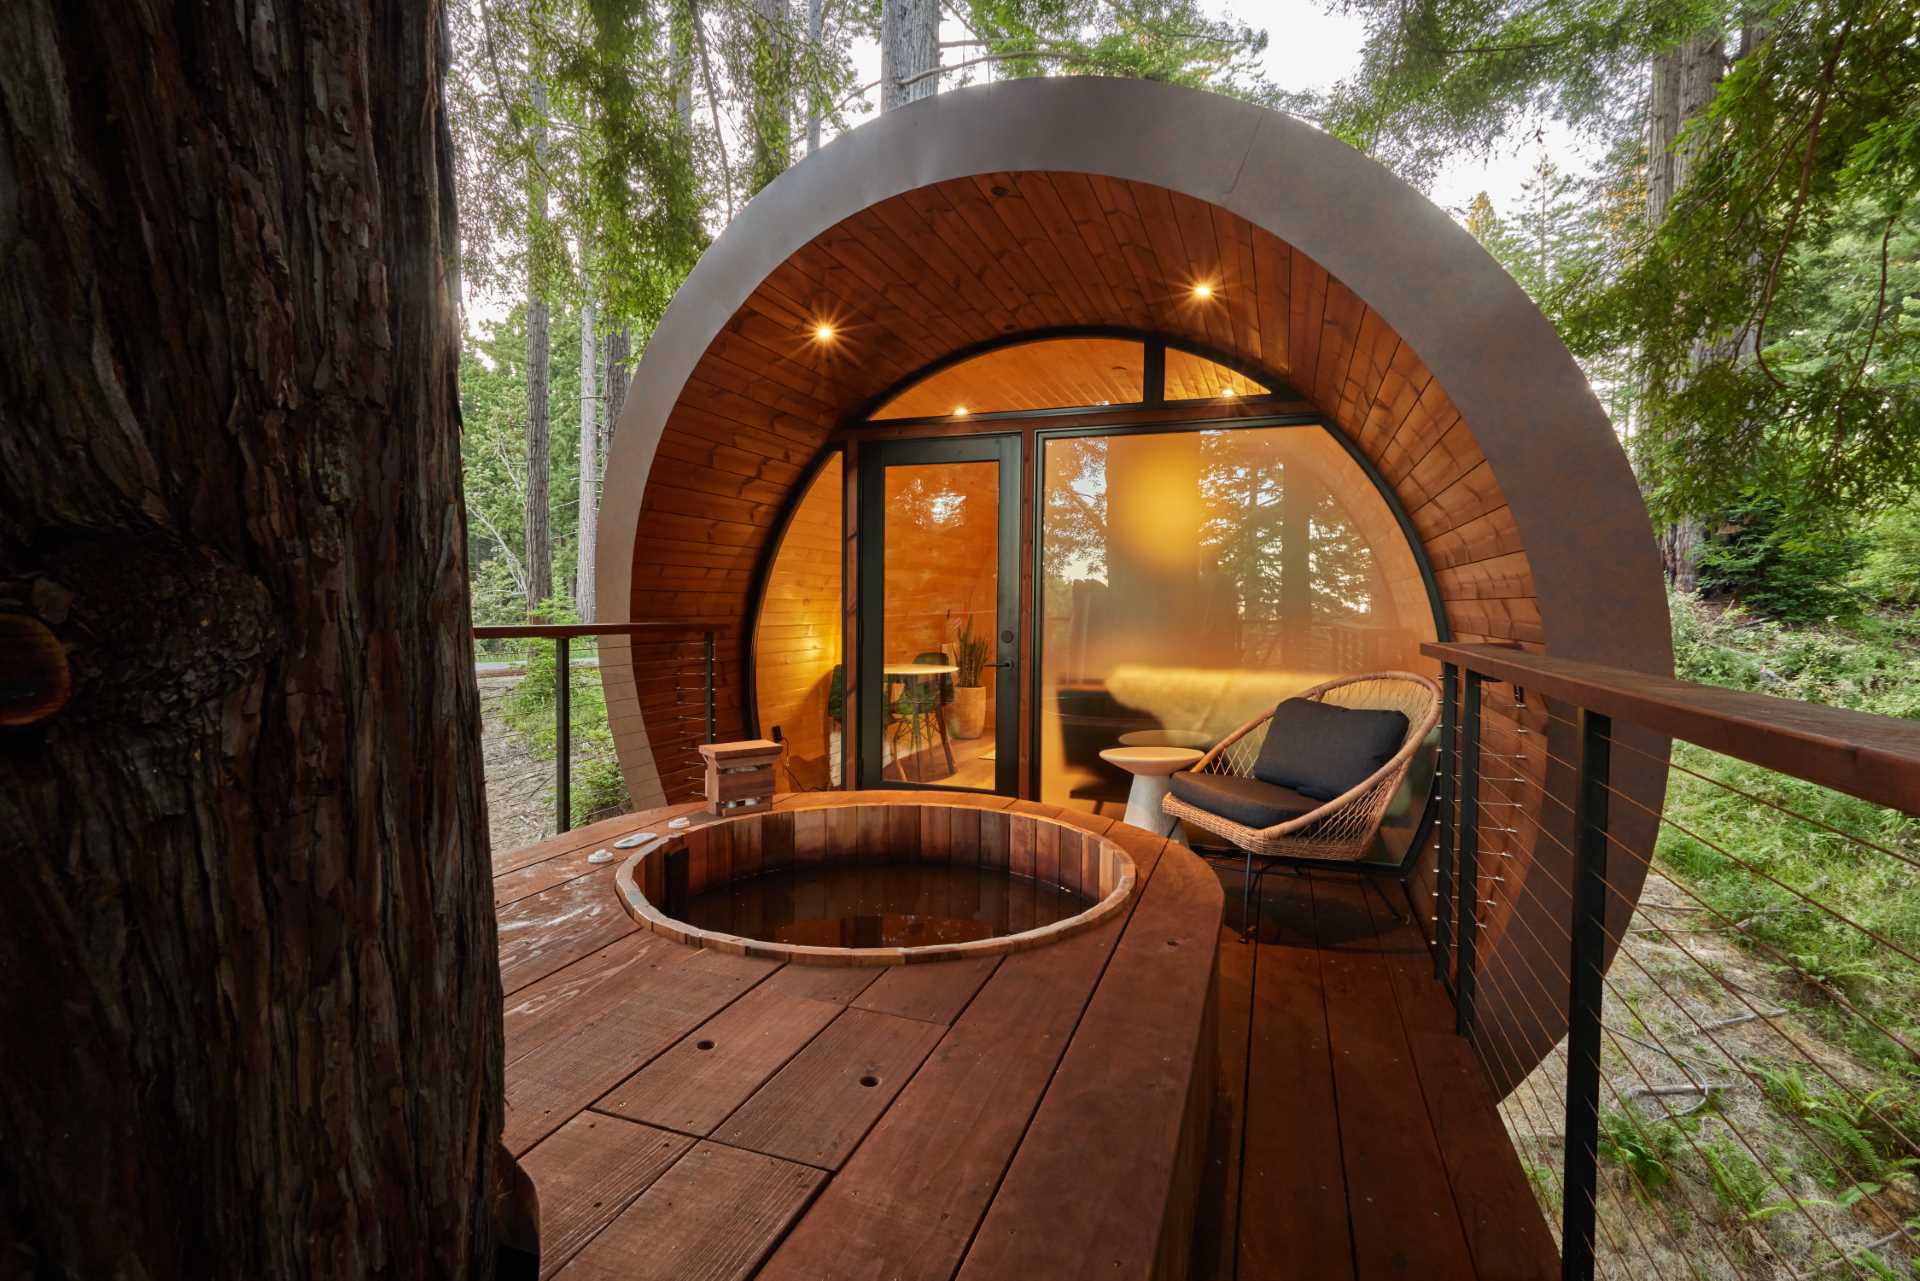 This modern treehouse cabin opens to a partially covered deck that wraps around a large tree, and has a cedar hot tub that overlooks the forest ravine.